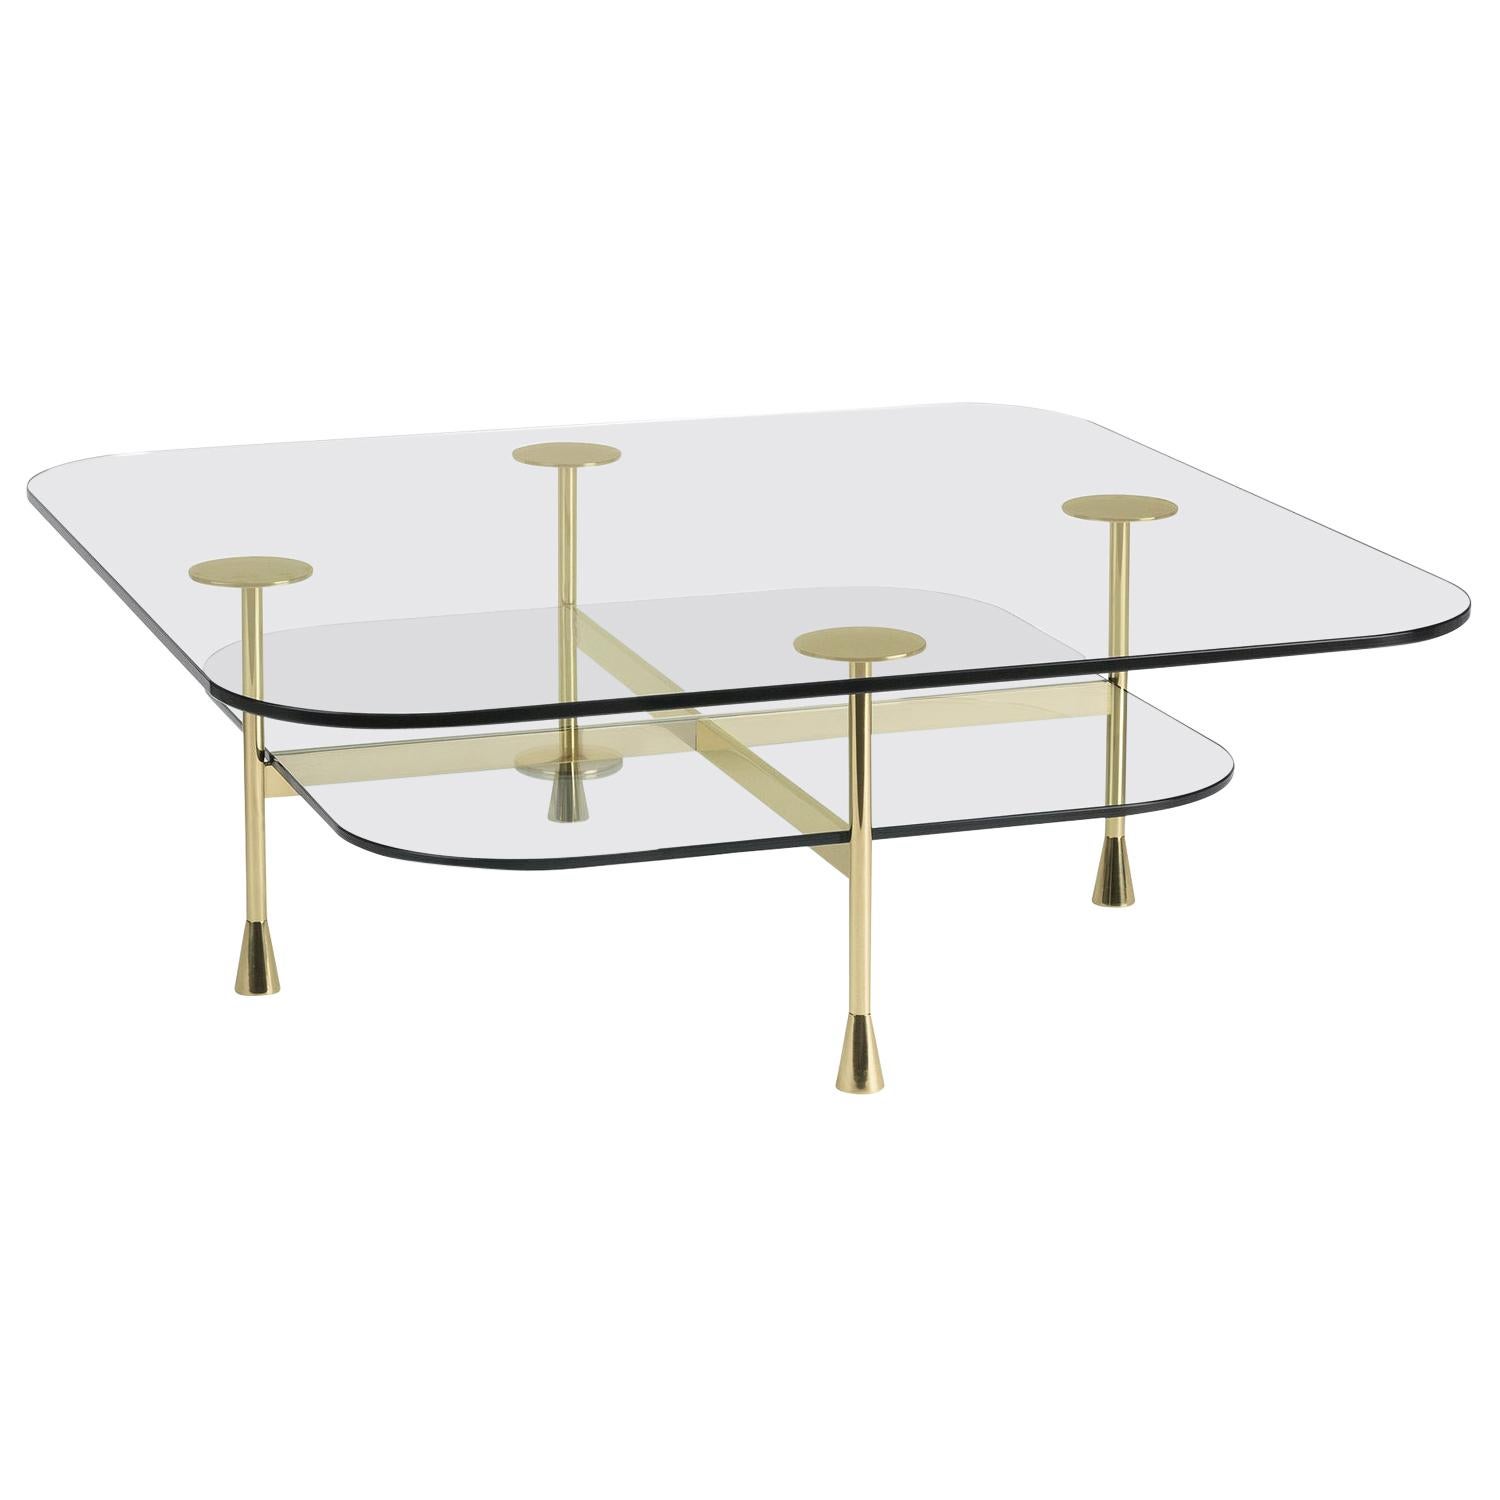 Part of the Da Vinci collection, this exquisite coffee table was introduced at Milan Design Week 2018. Its light and elegant silhouette is made of a brass structure that combines pure geometric elements with contrasting straight and round shapes to